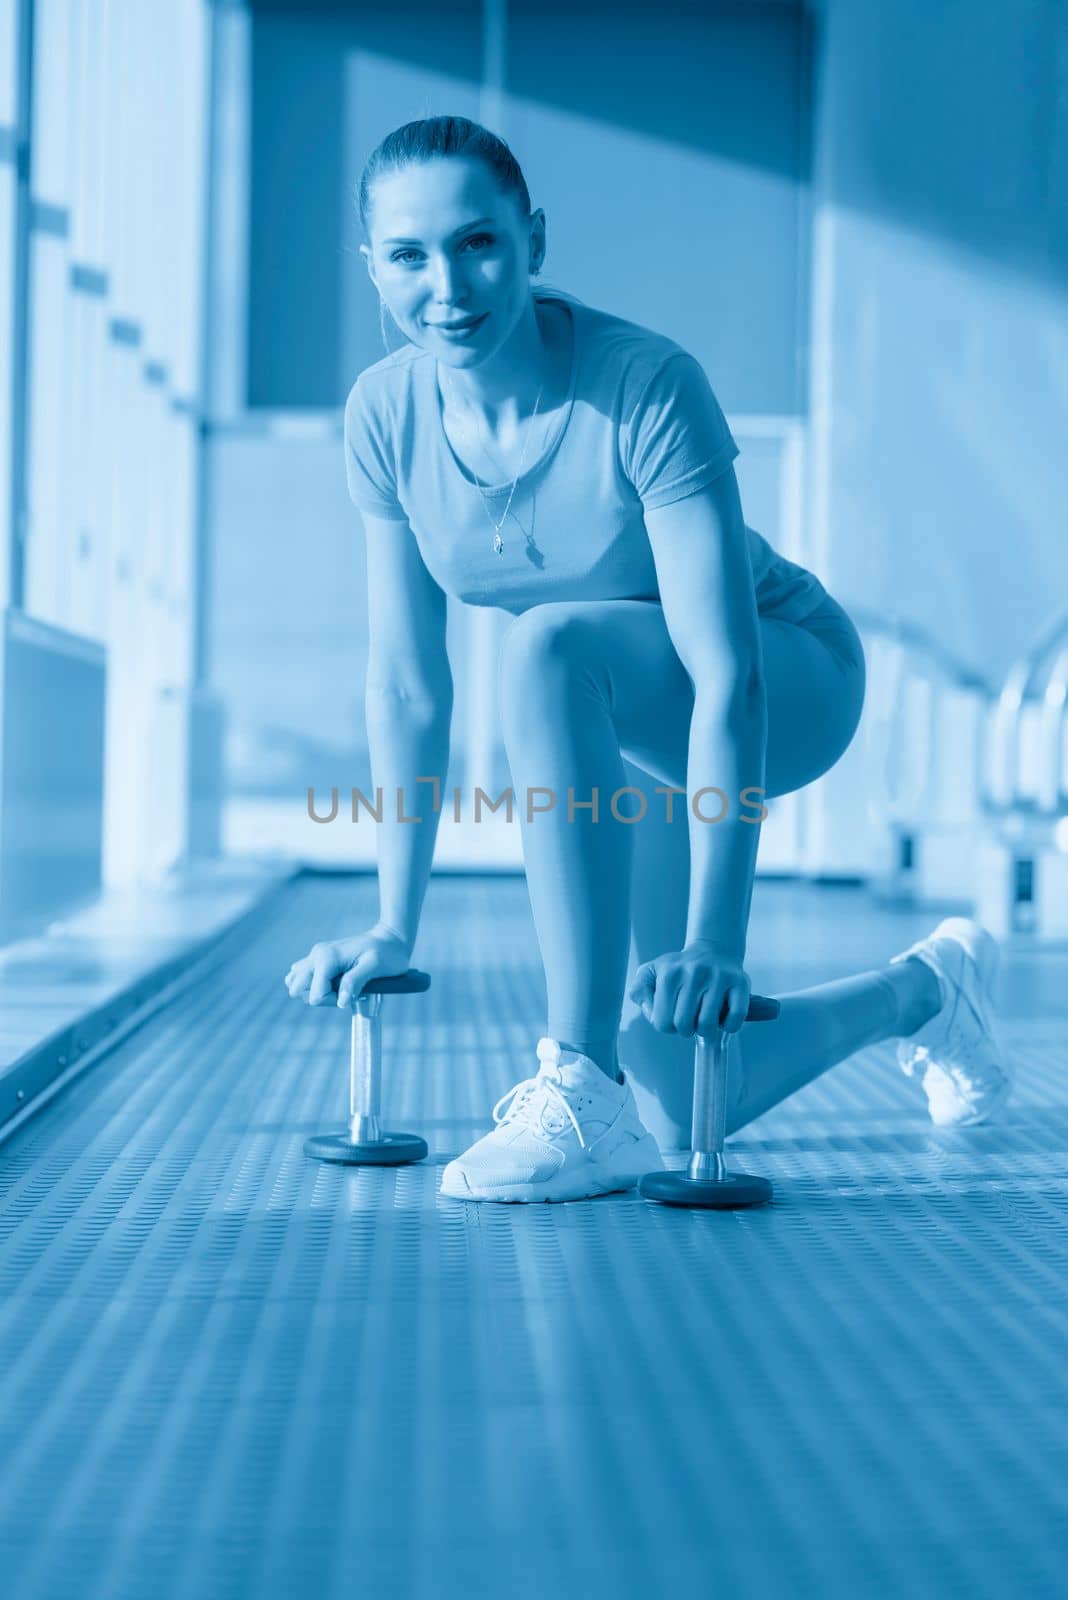 Physically fit woman at the gym lifting dumbbells to strengthen her arms and biceps. Muscular woman sitting on exercise mat looking at her arms.